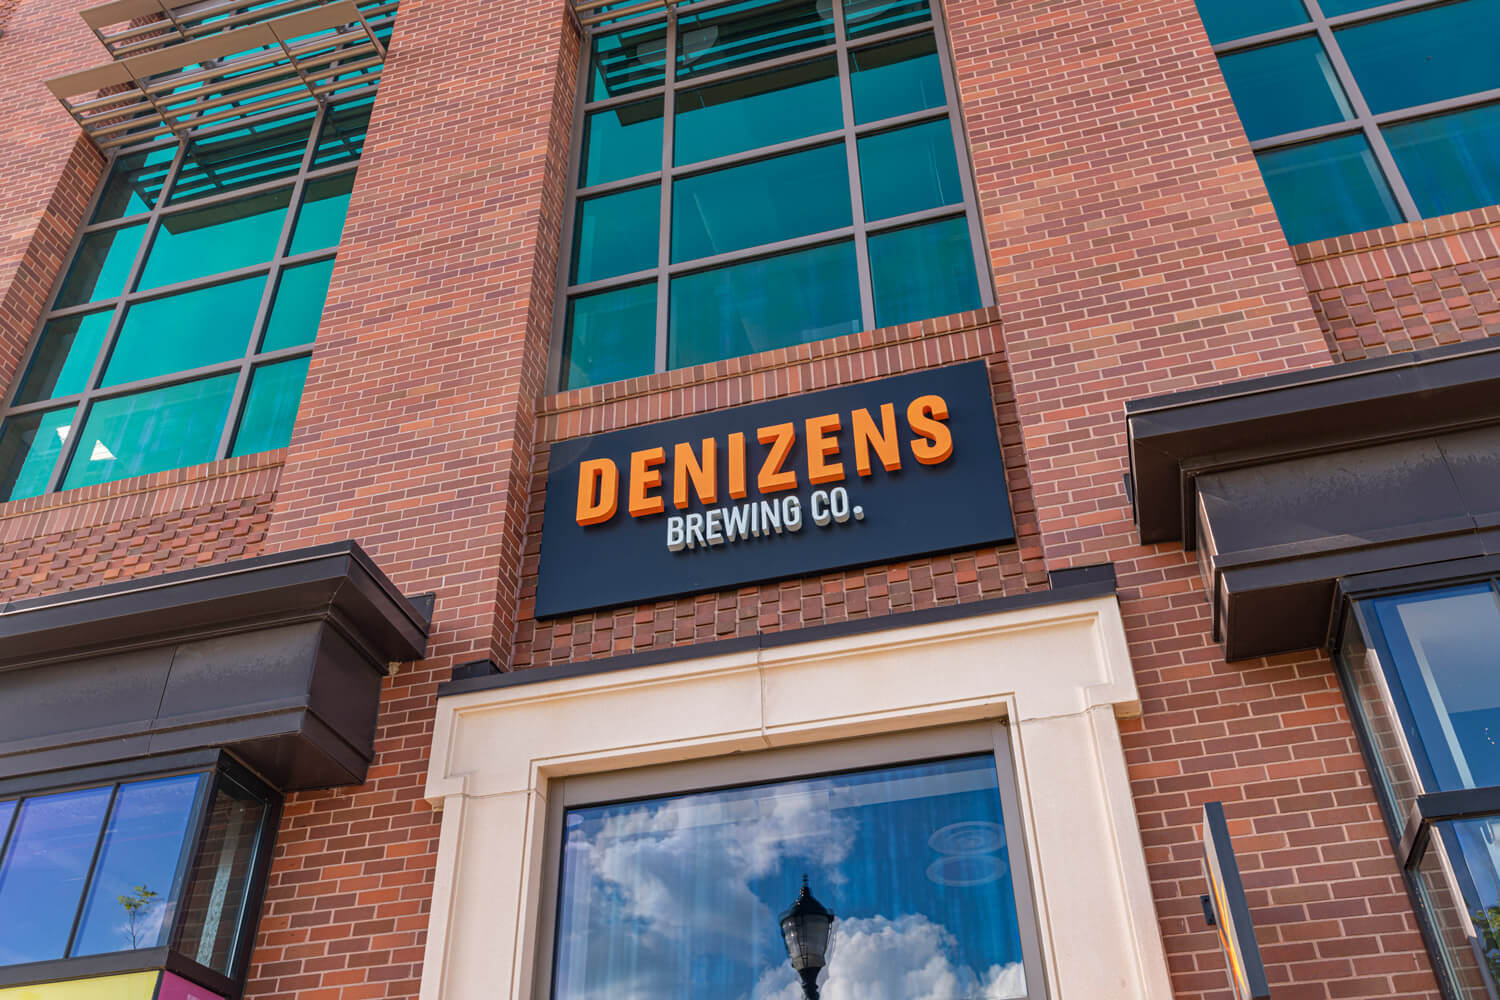 Pick up a six-pack or sit down for a pint at Denizens Brewing Co